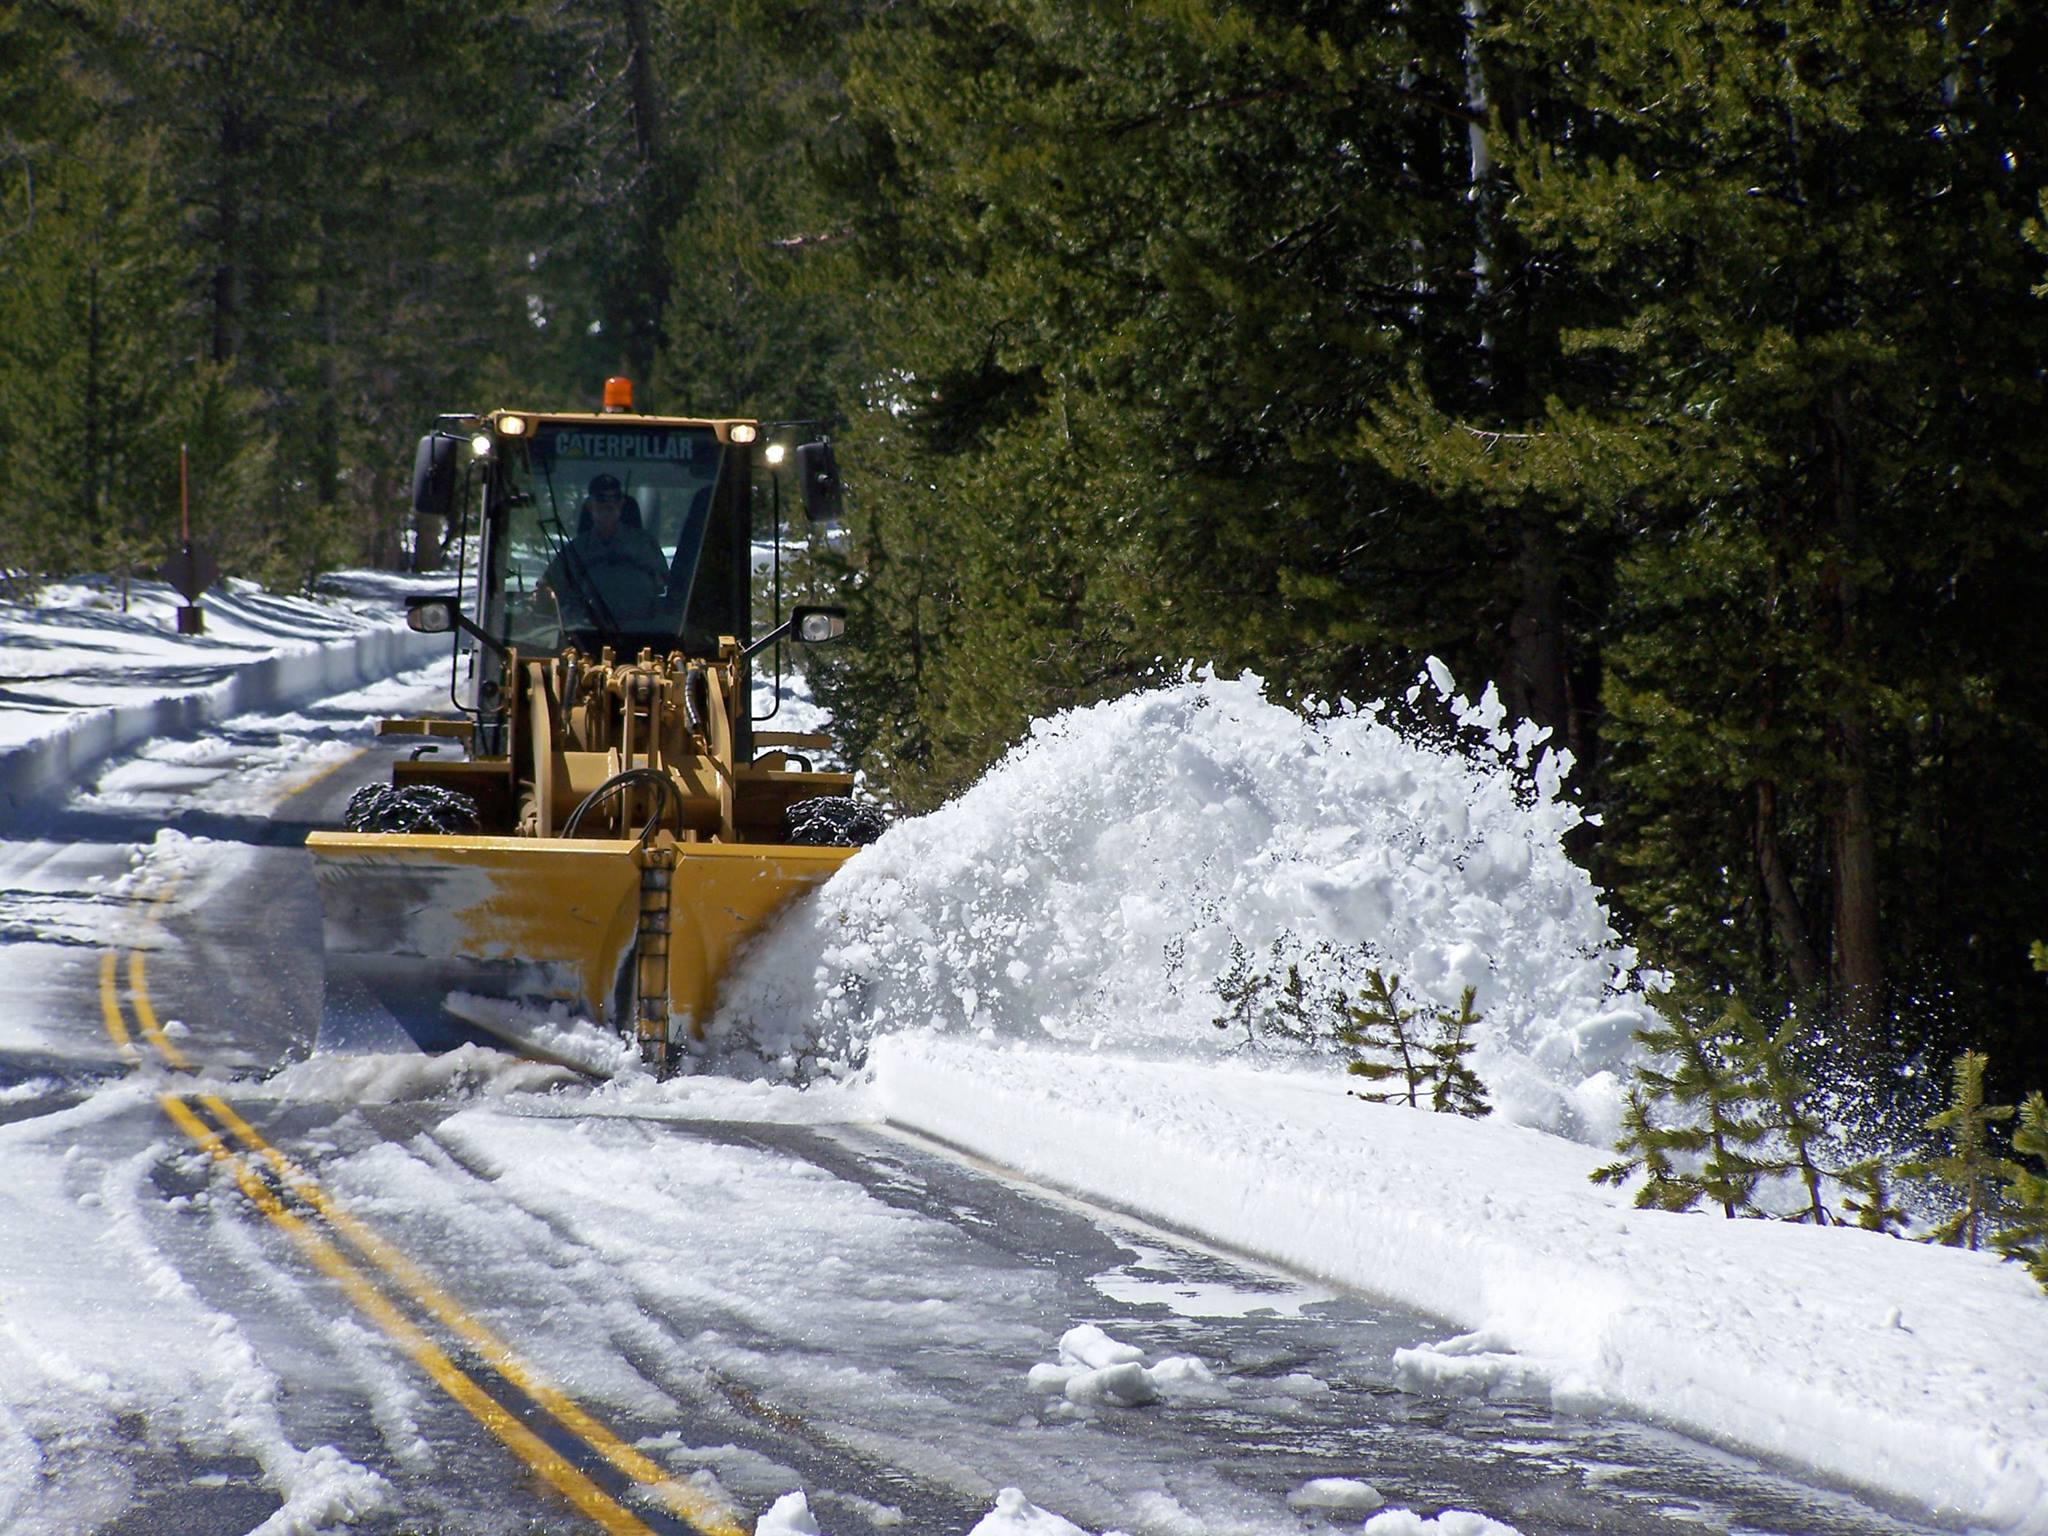 Snow plow on the first day of snow removal on Tioga Pass road at Porcupine Flat on April 17th, 2016.  image:  yosemite np